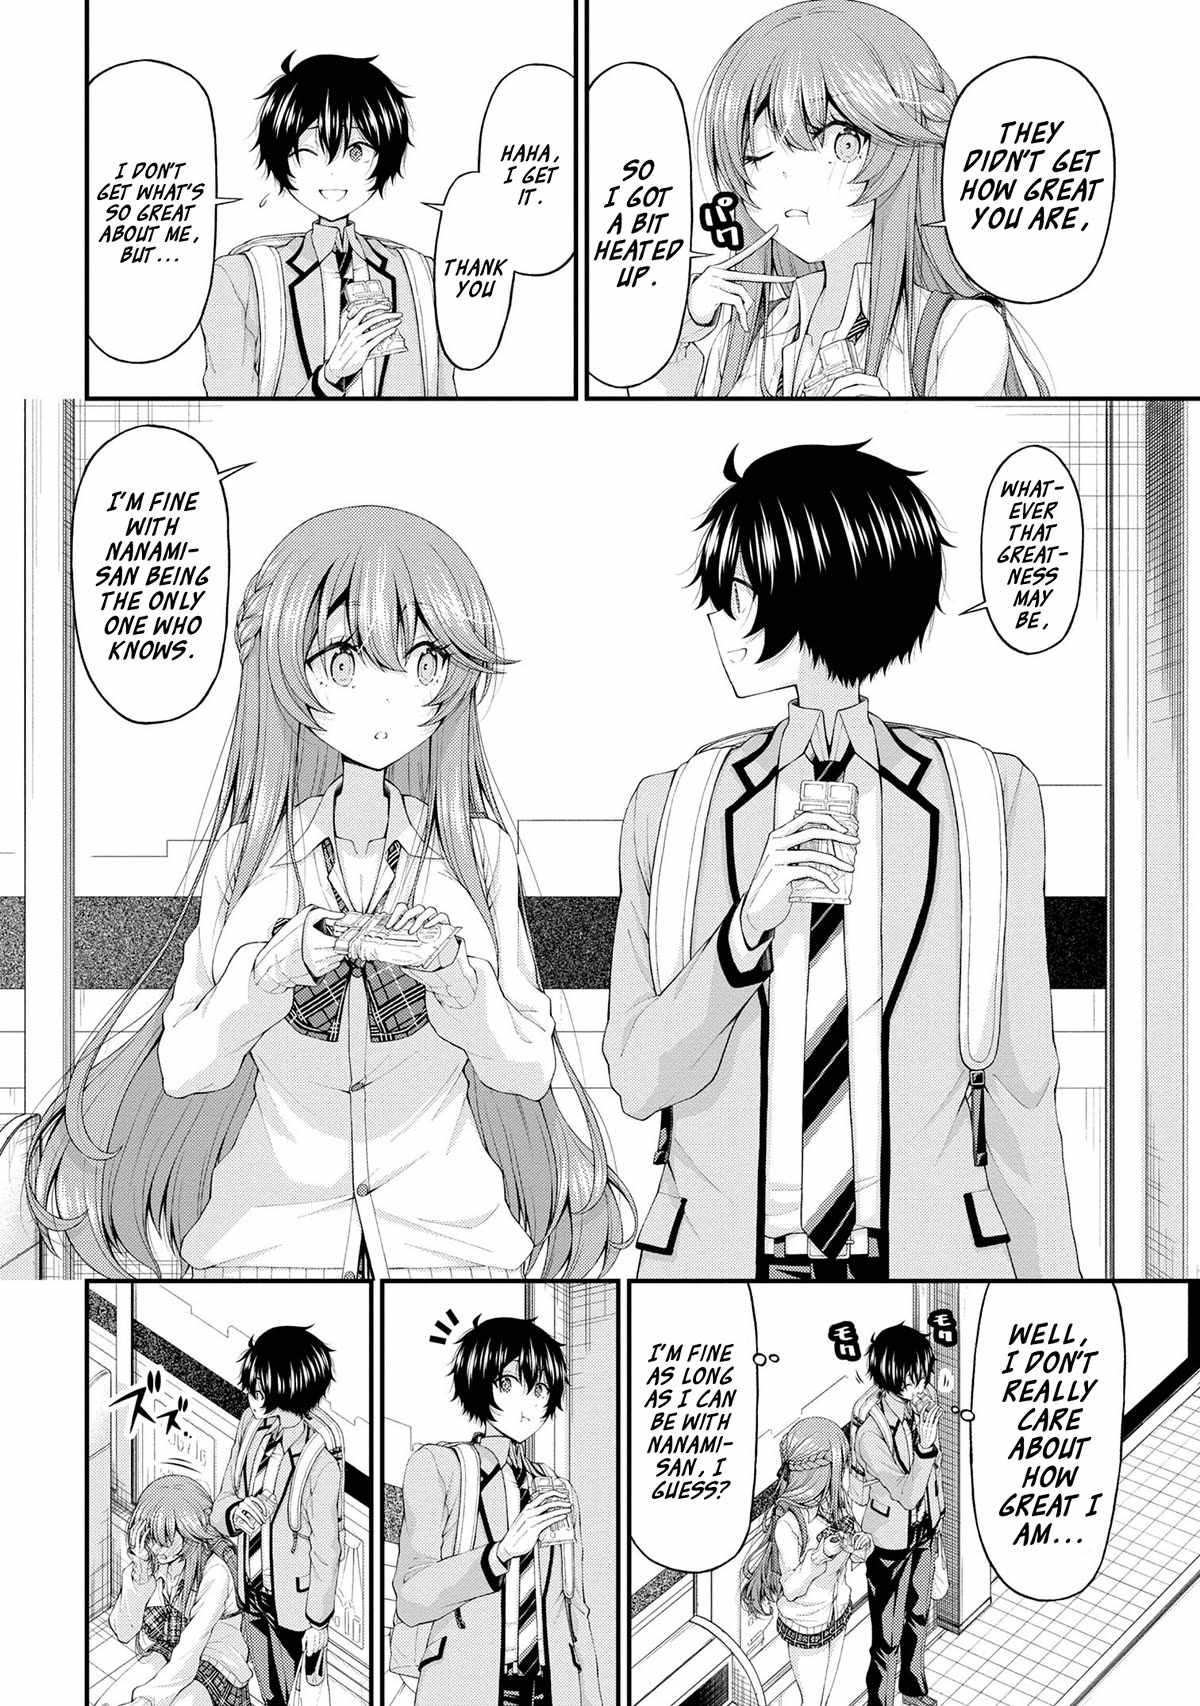 The Gal Who Was Meant to Confess to Me as a Game Punishment Has Apparently Fallen in Love with Me Chapter 13-eng-li - Page 13